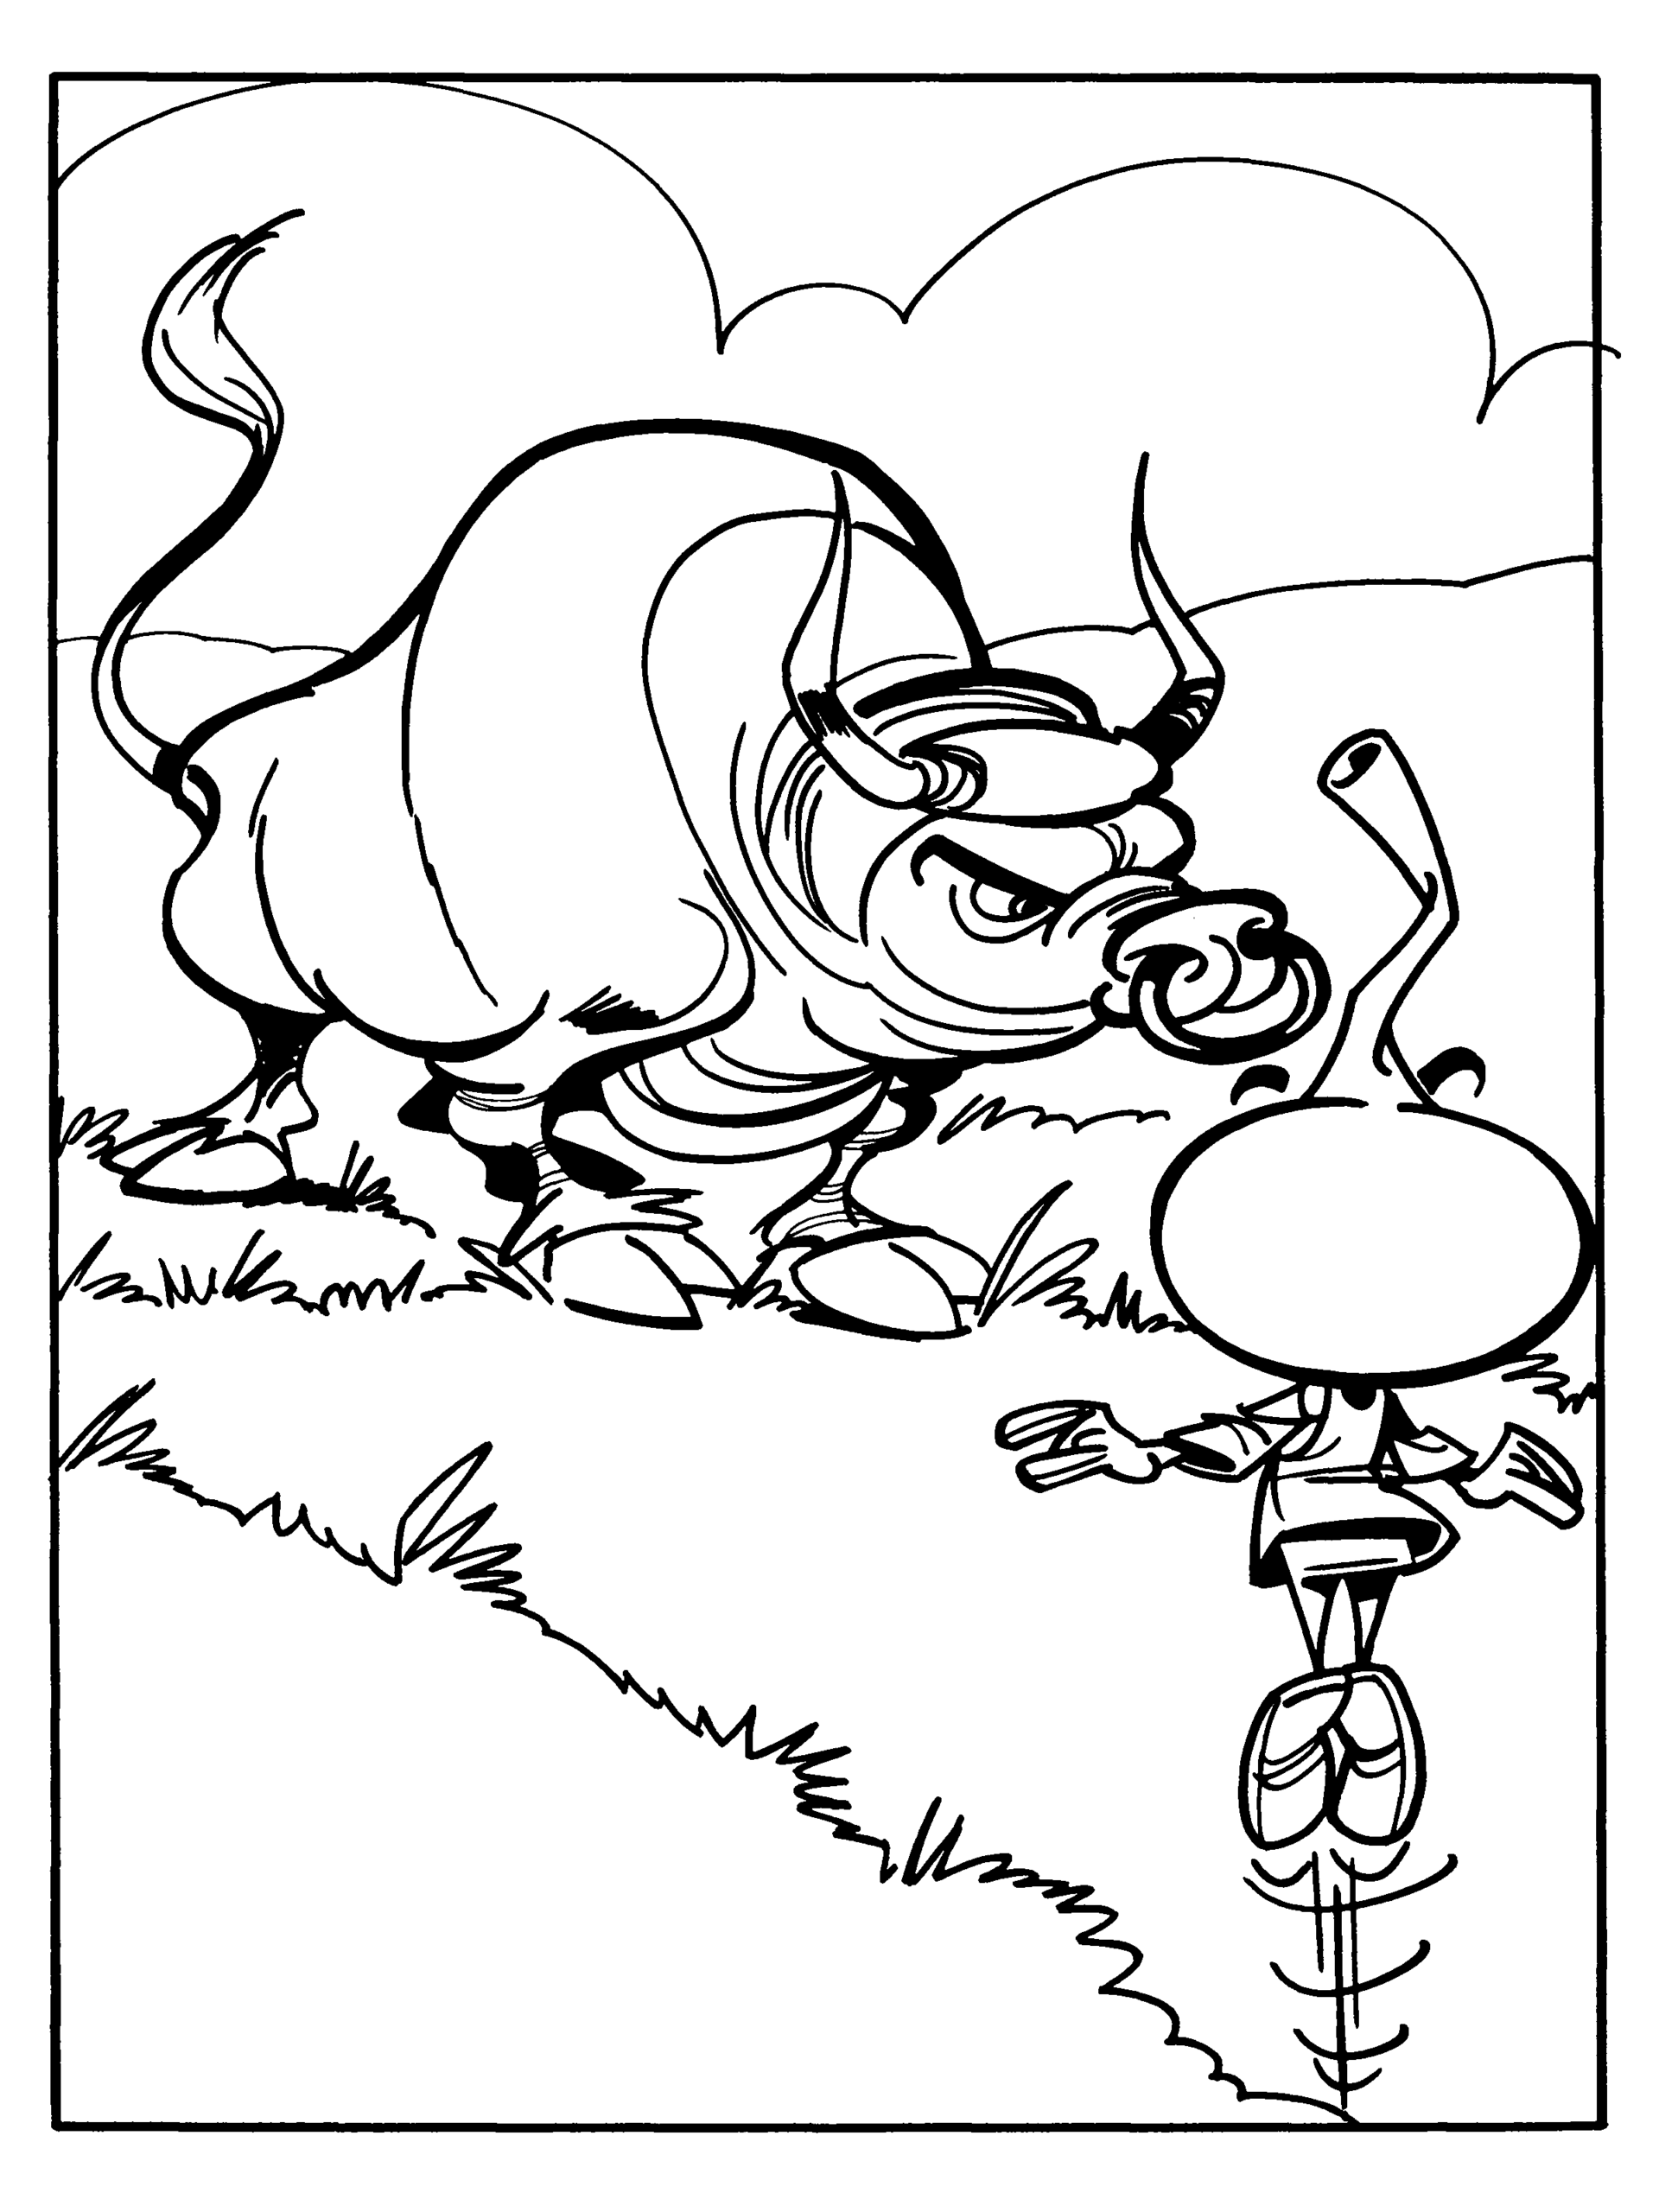 Snorks Coloring Pages TV Film snorks 15 Printable 2020 07647 Coloring4free